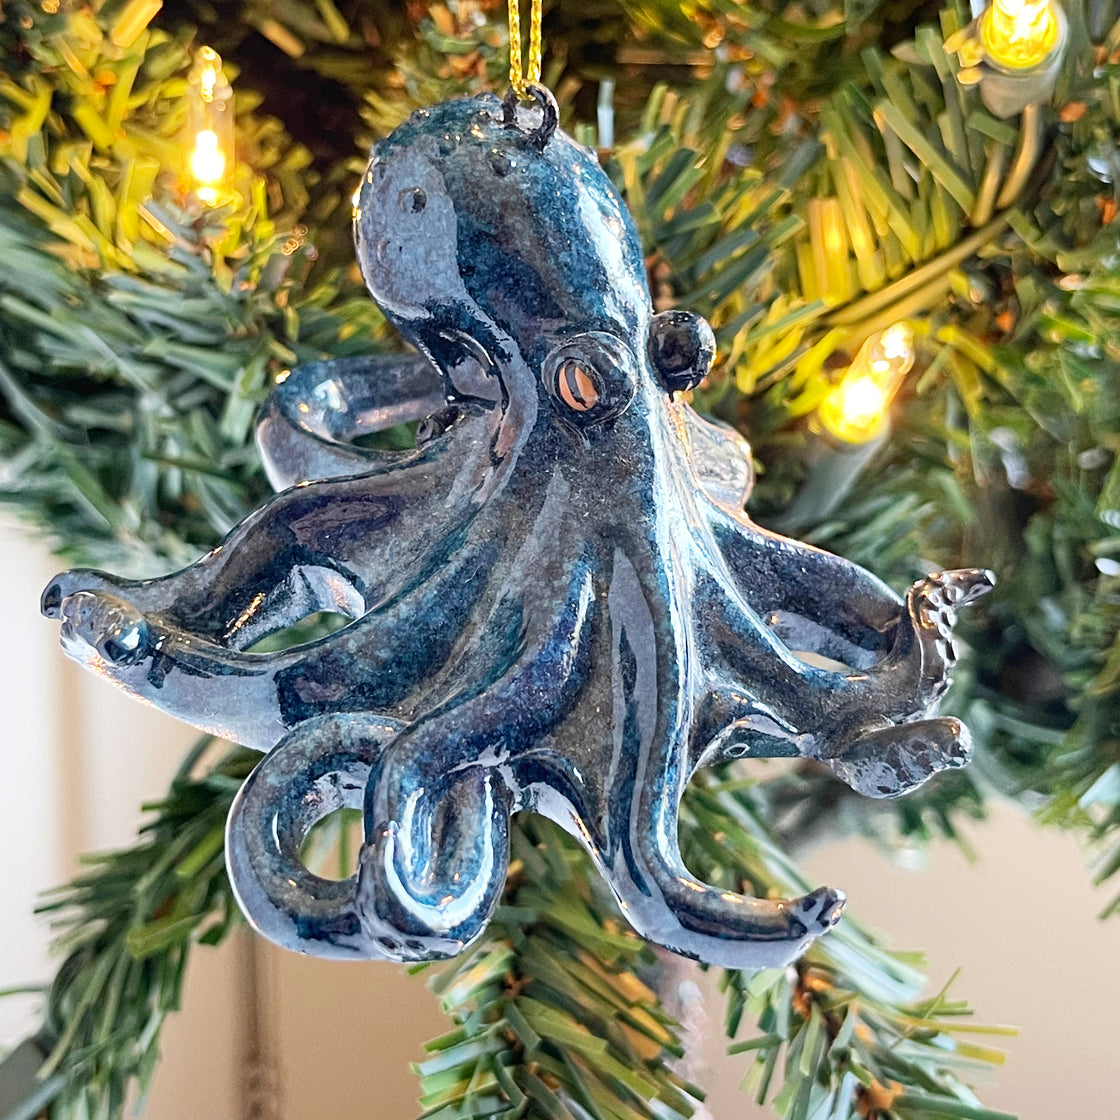 A detailed perspective of the rengora octopus displaying its glossy hand-painted turquoise blue hue as it dangles from a Christmas tree